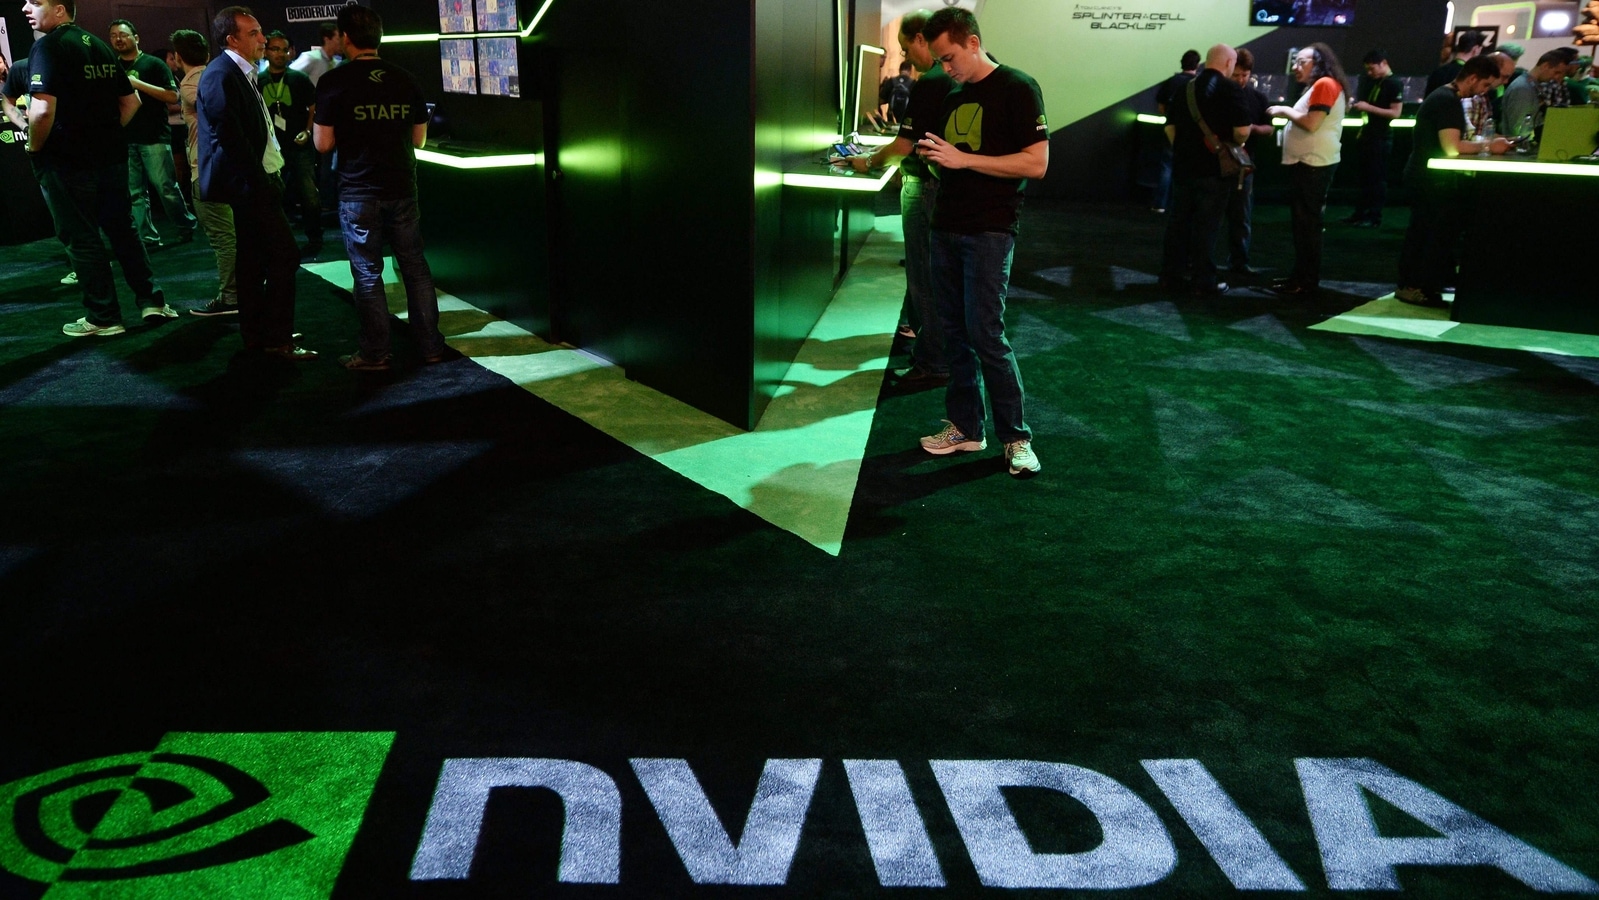 Nvidia partners Reliance Industries to develop AI apps for India